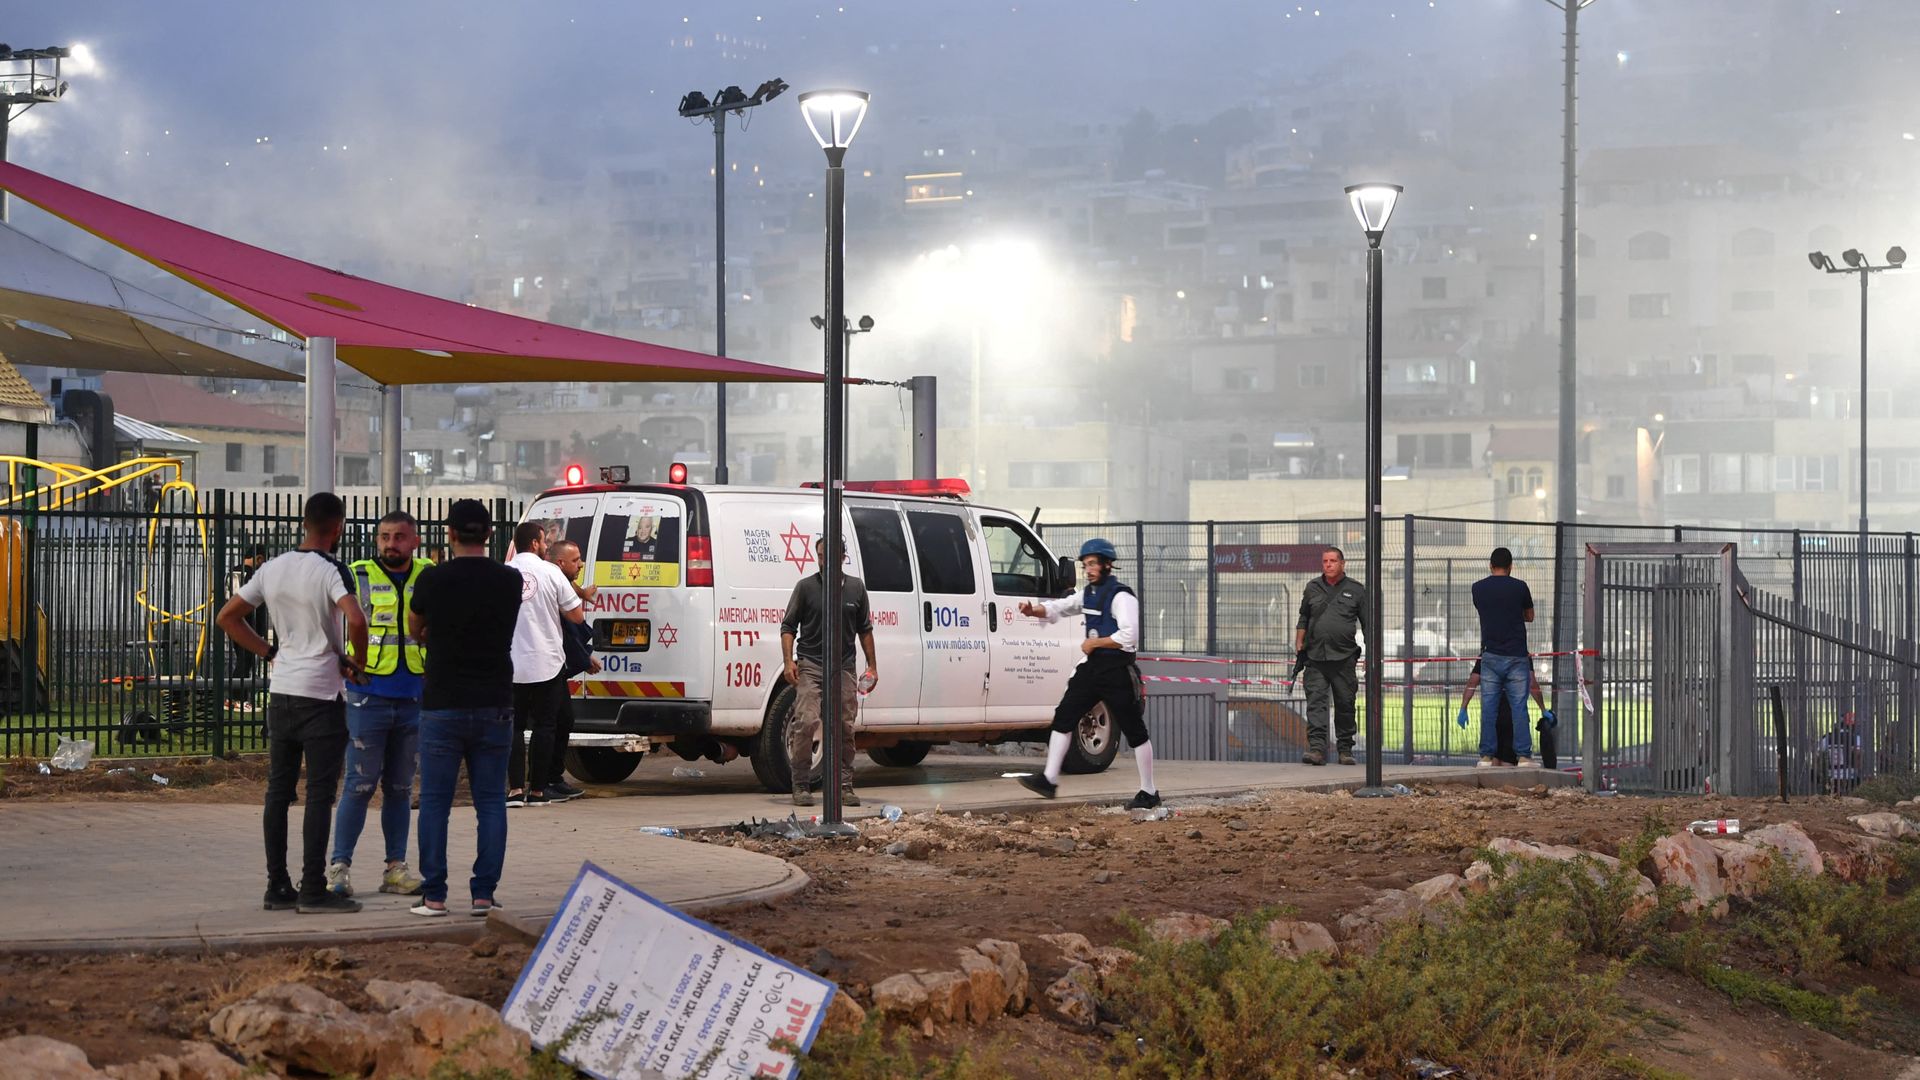 Israeli authorities say at least 11 people killed in rocket attack on football pitch in Israeli-occupied Golan Heights